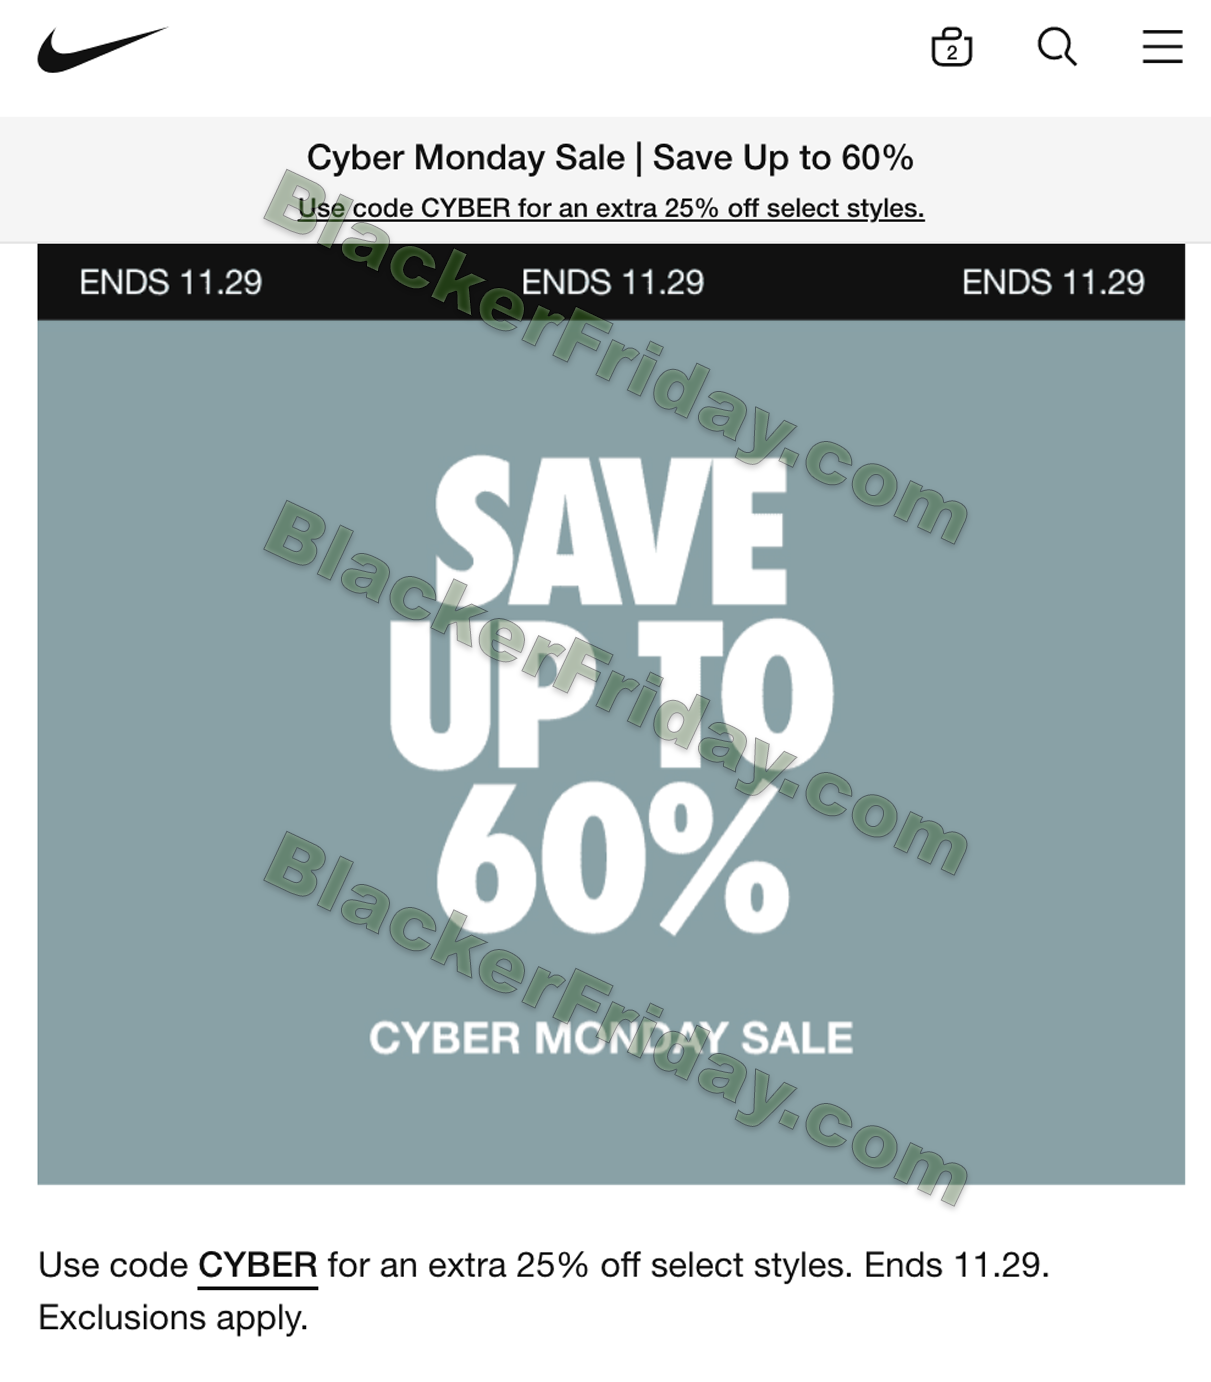 loco productos quimicos Desmantelar What's expected at Nike's Cyber Monday 2023 Sale - Blacker Friday